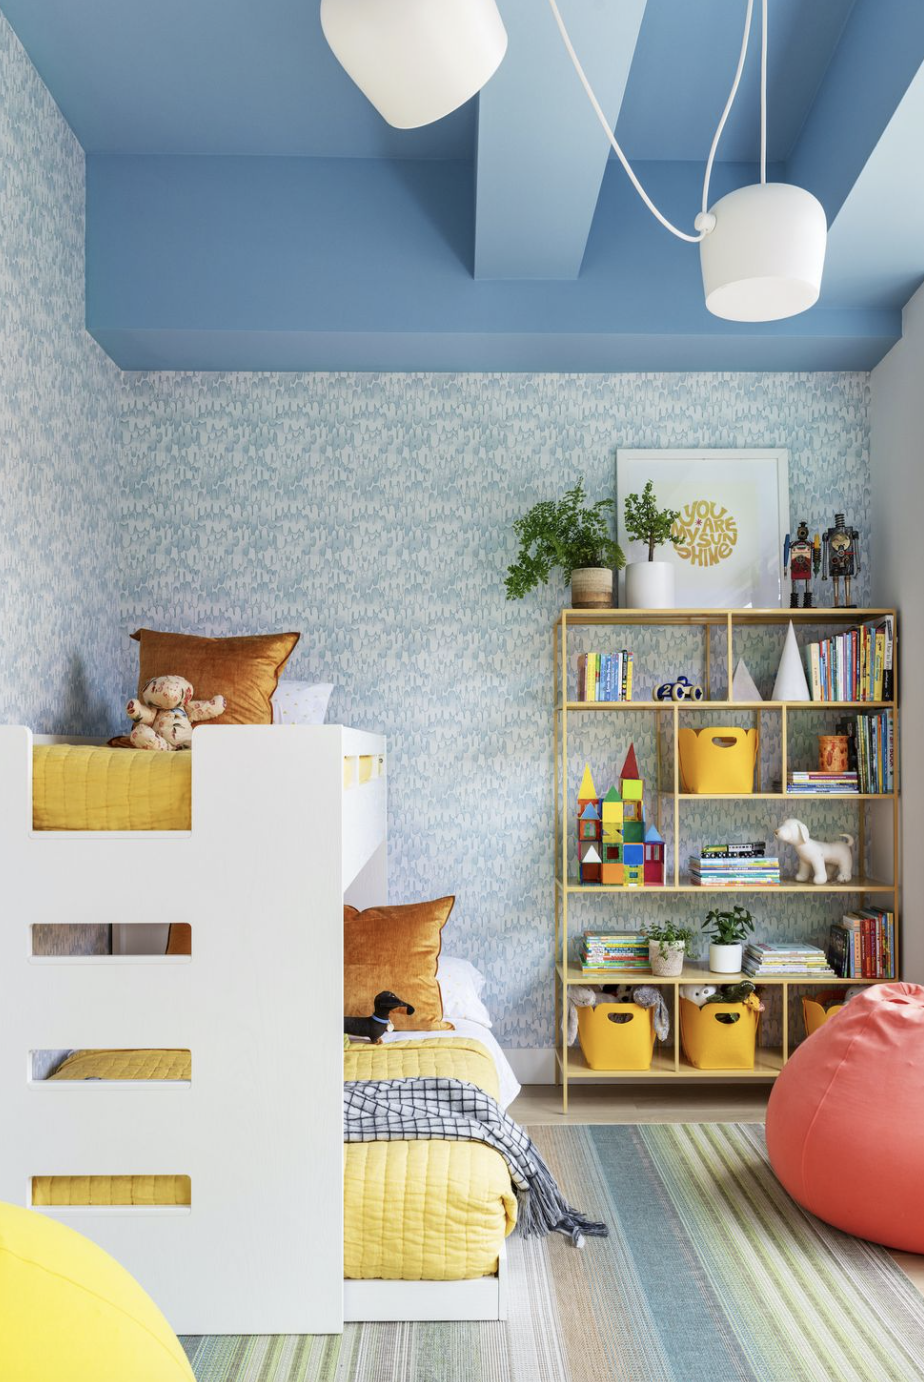 12 Fantastic Ways to Organize Kids' Bedrooms and Bathrooms